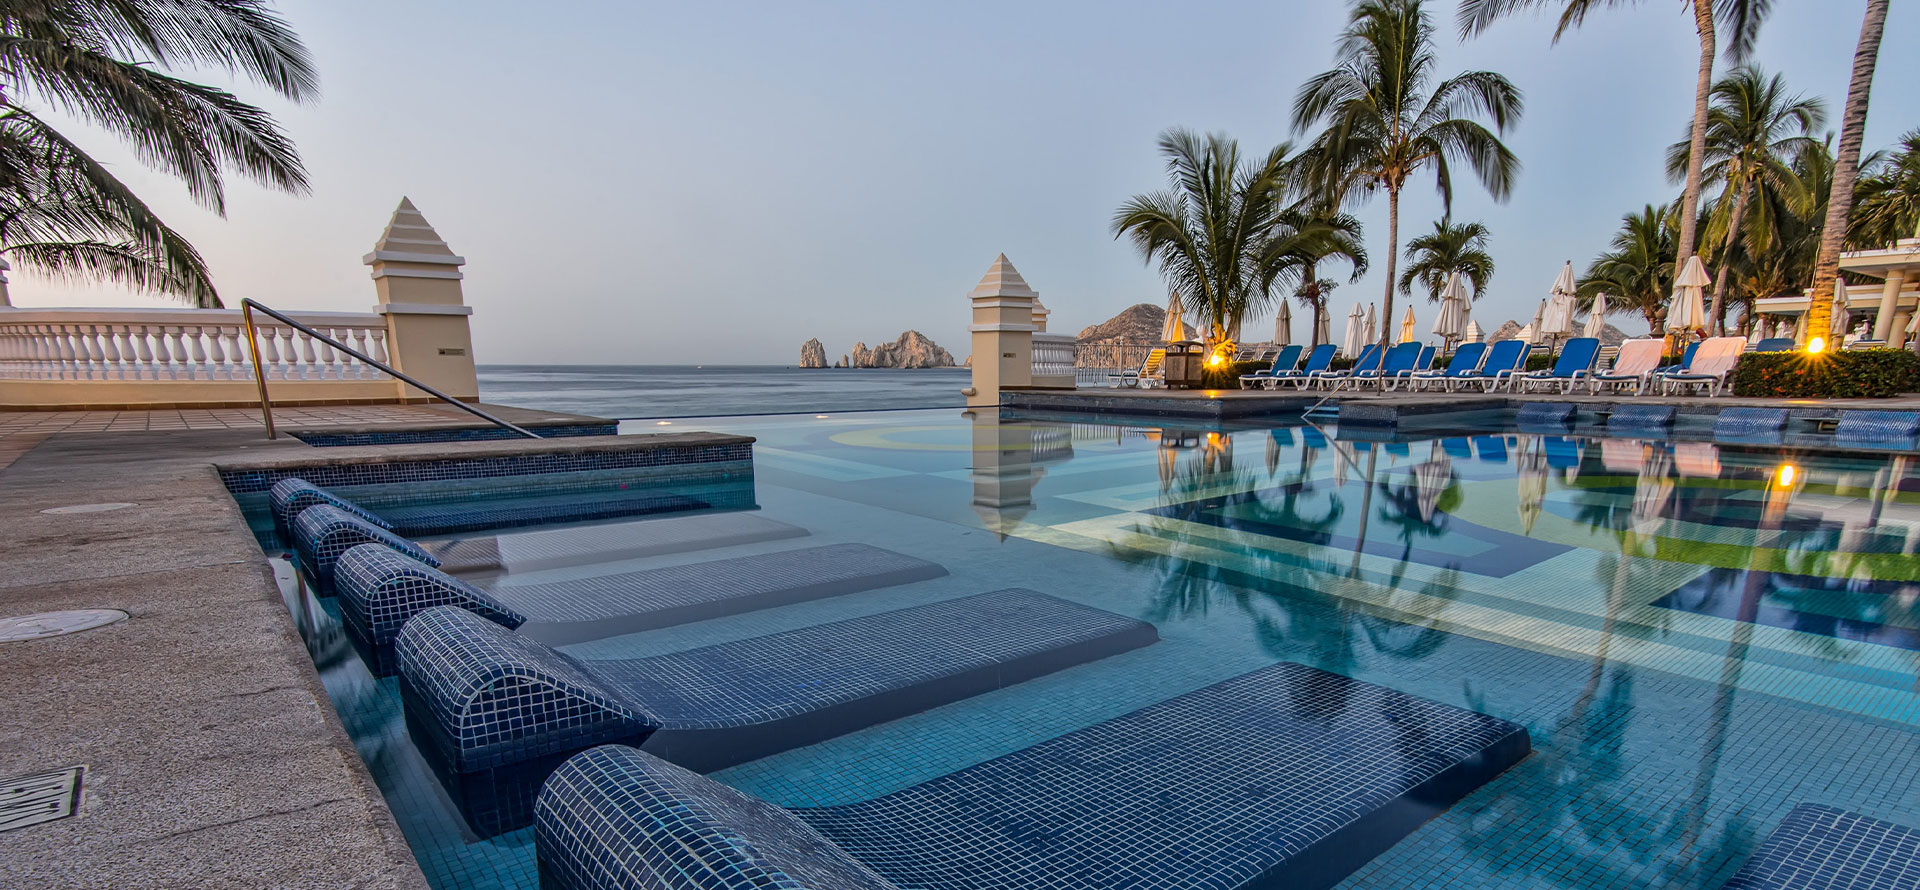 Swimming pool in Cabo resort at the best time to go.